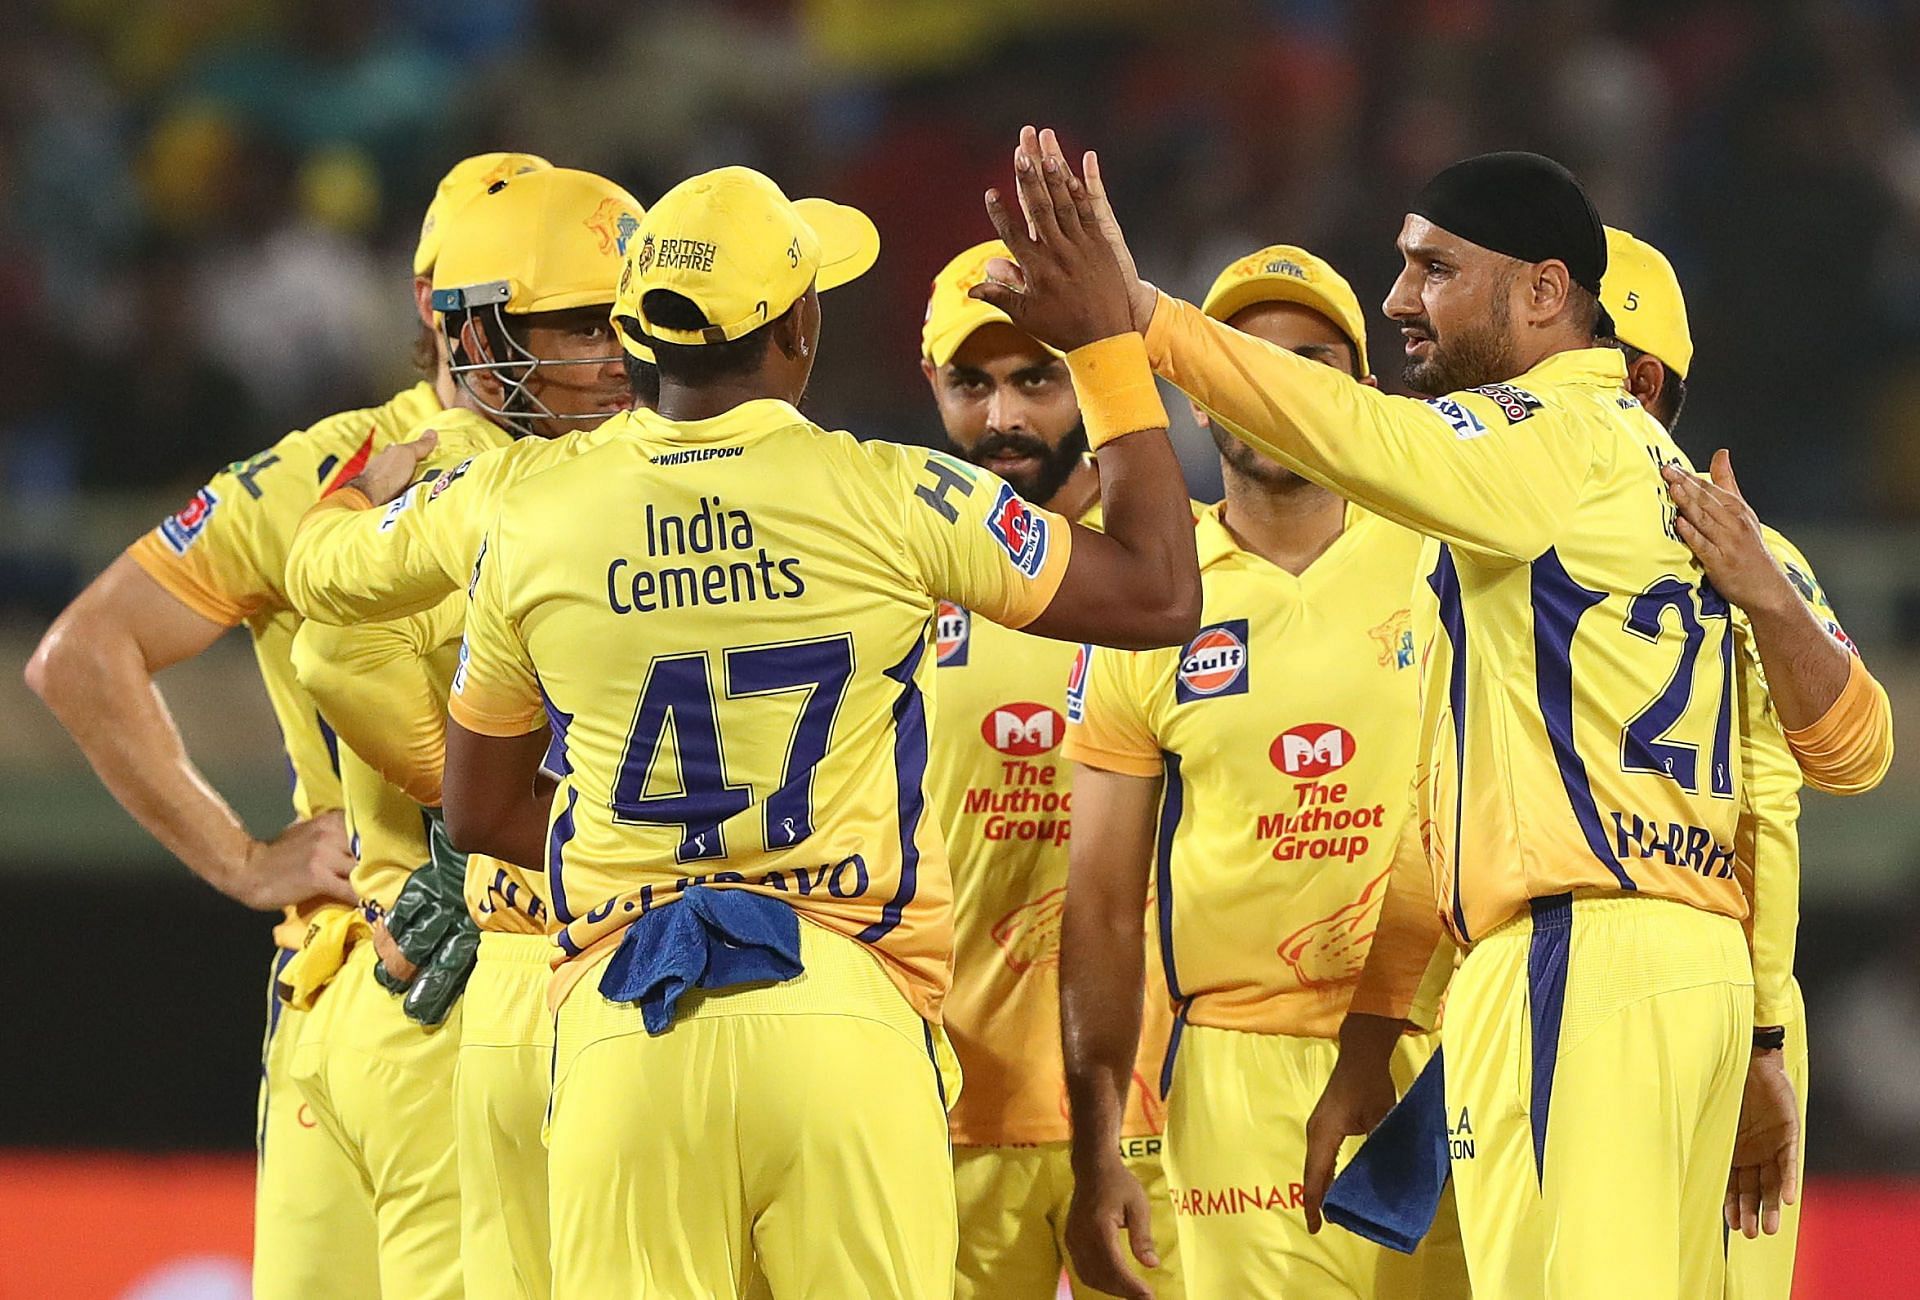 Harbhajan Singh celebrates a wicket with CSK teammates. Pic: Getty Images